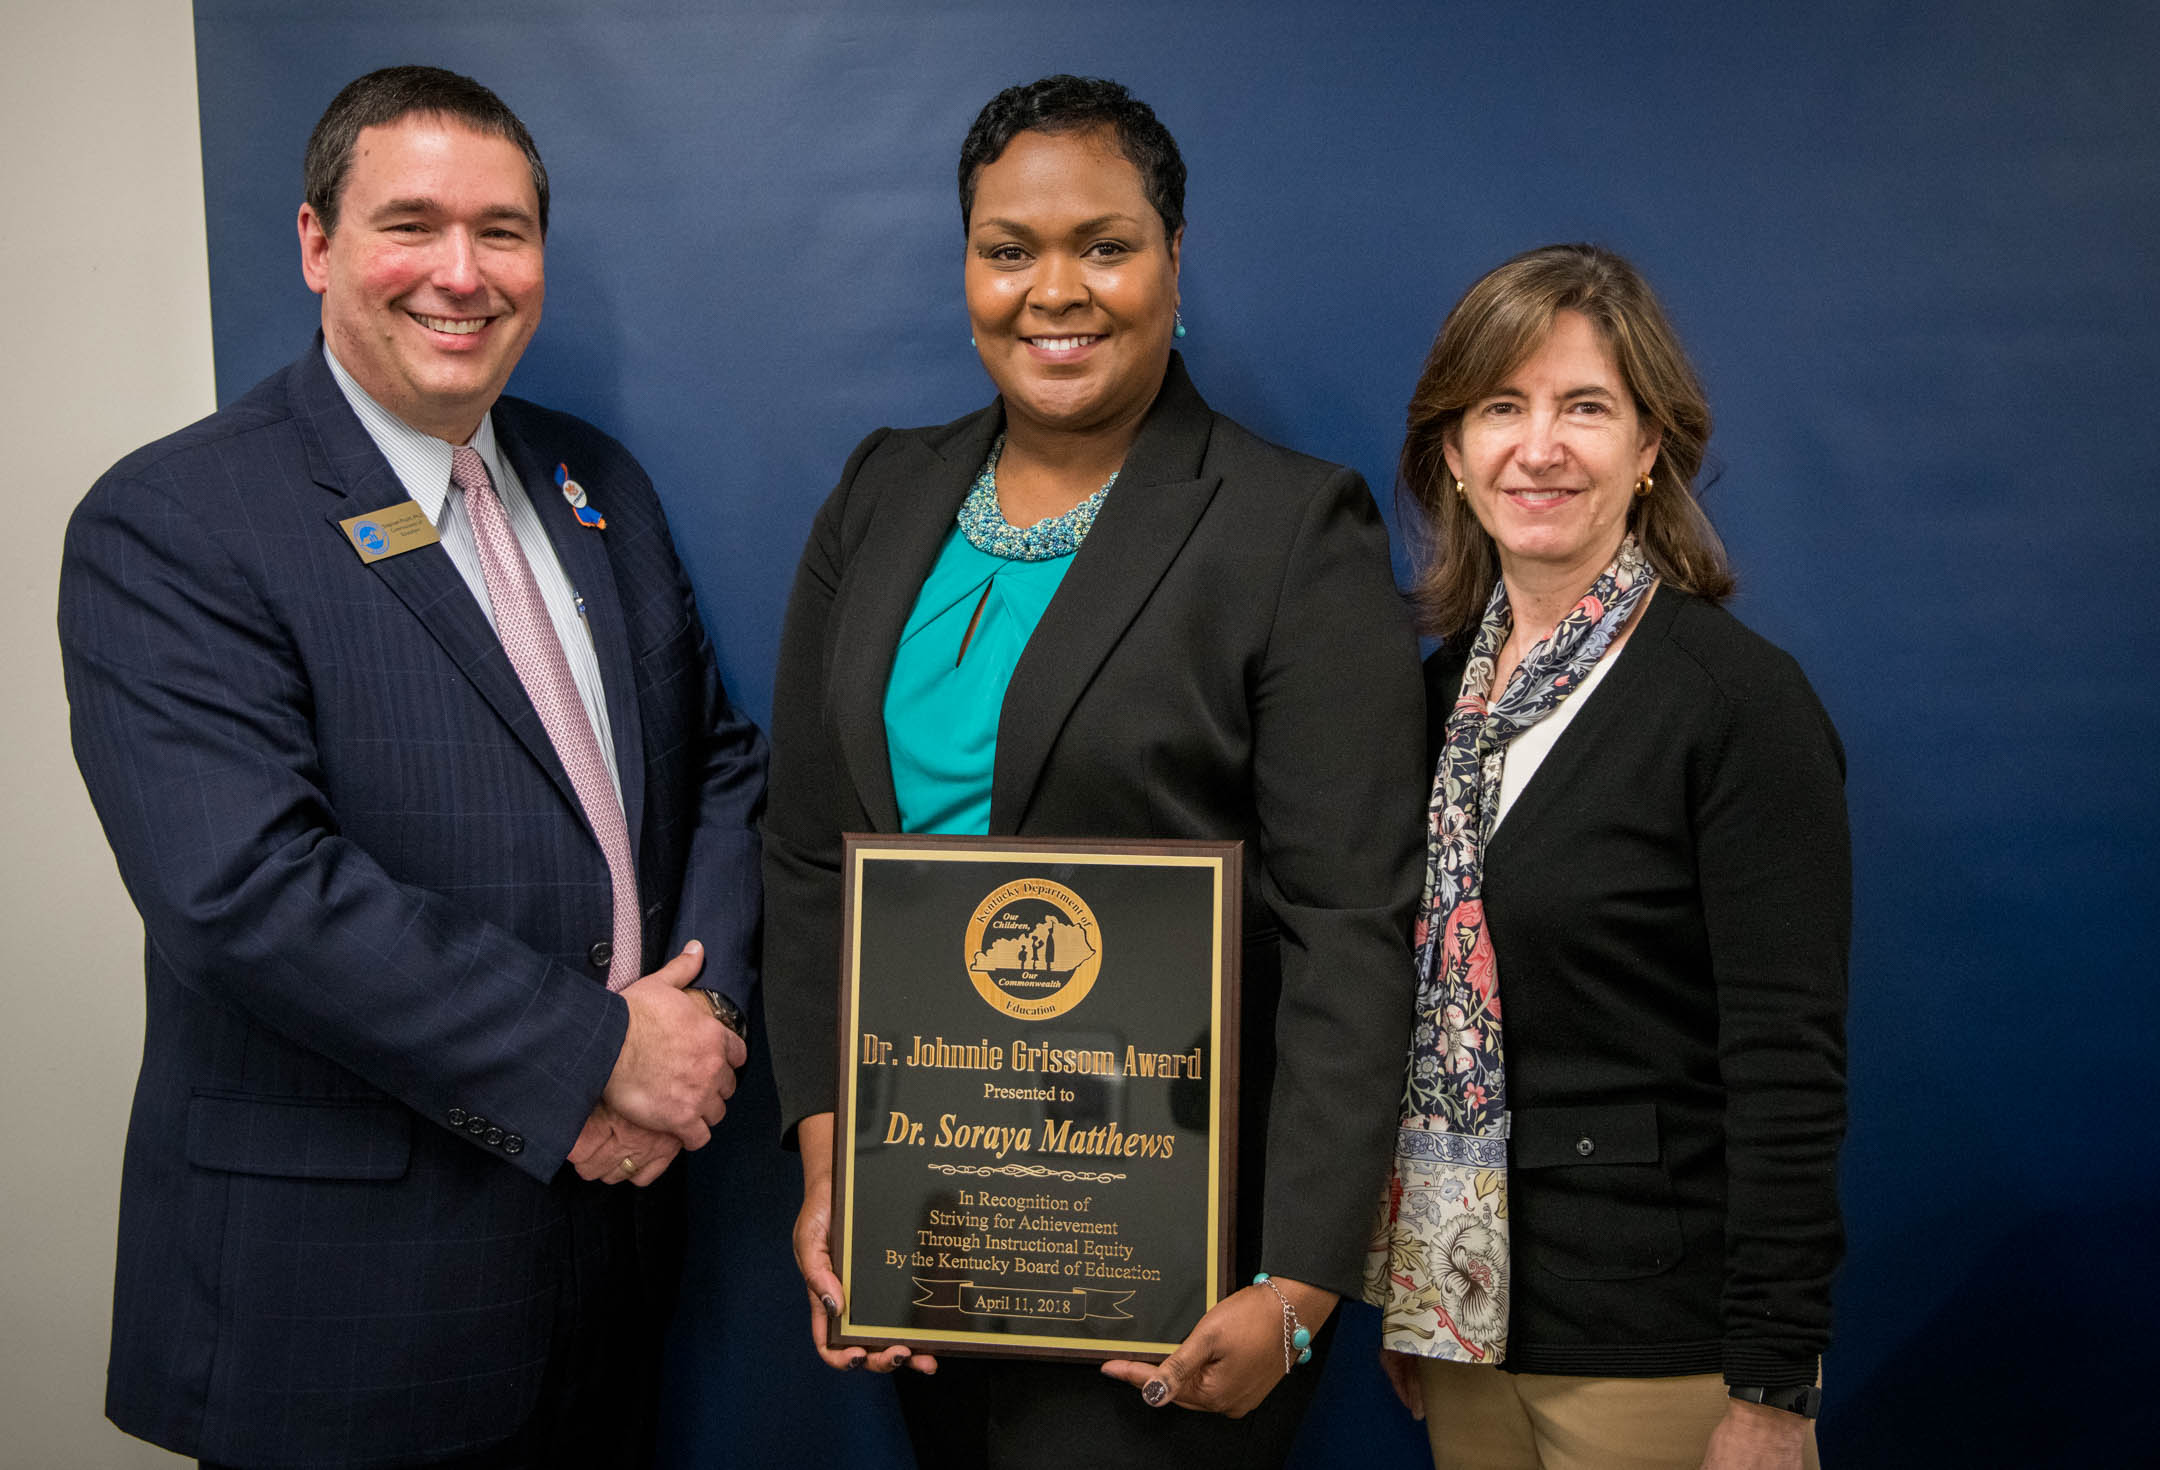 Soraya Matthews, center, poses with Commissioner Stephen Pruitt and KBE Chair Mary Gwen Wheeler after being awarded the Dr. Johnnie Grissom Award. Photo by Bobby Ellis, April 11, 2018